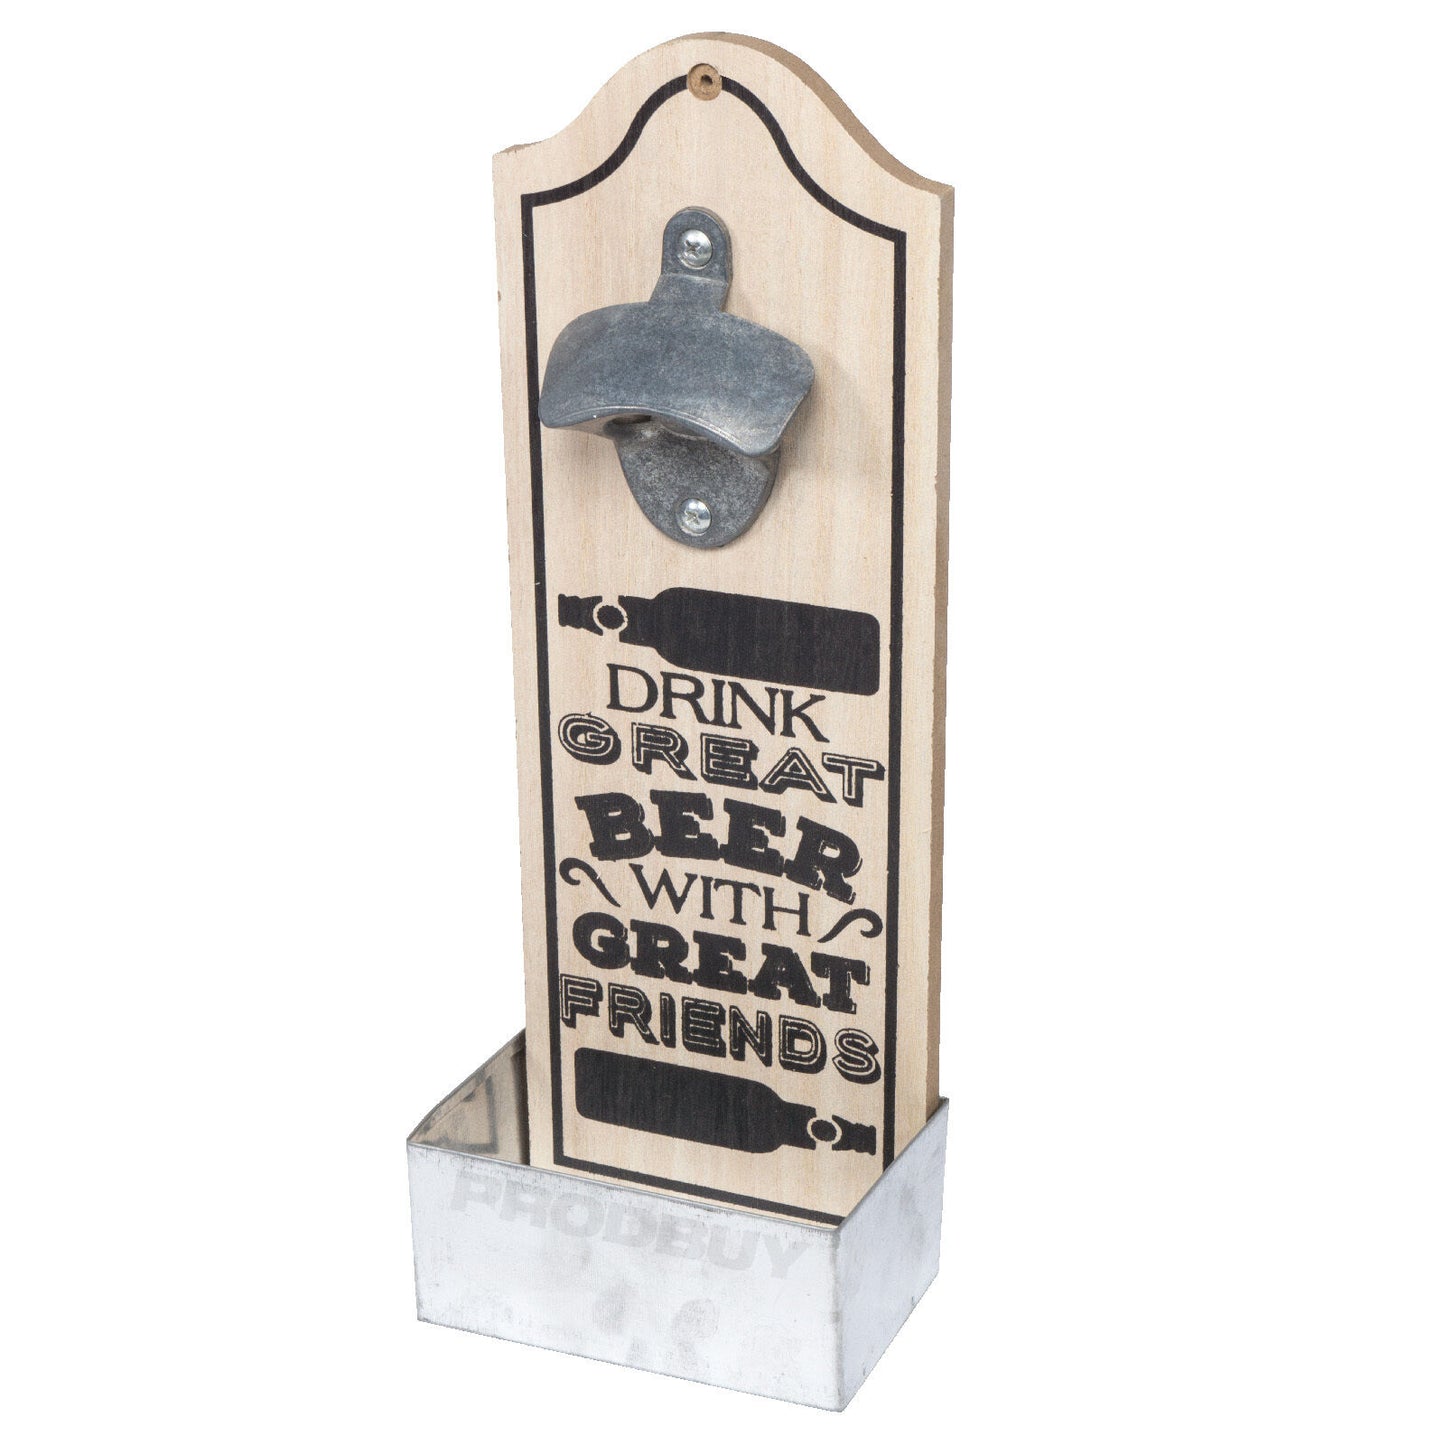 Wall Mounted Wooden Bottle Opener with Catcher "Drink Great Beer With Great Friends"